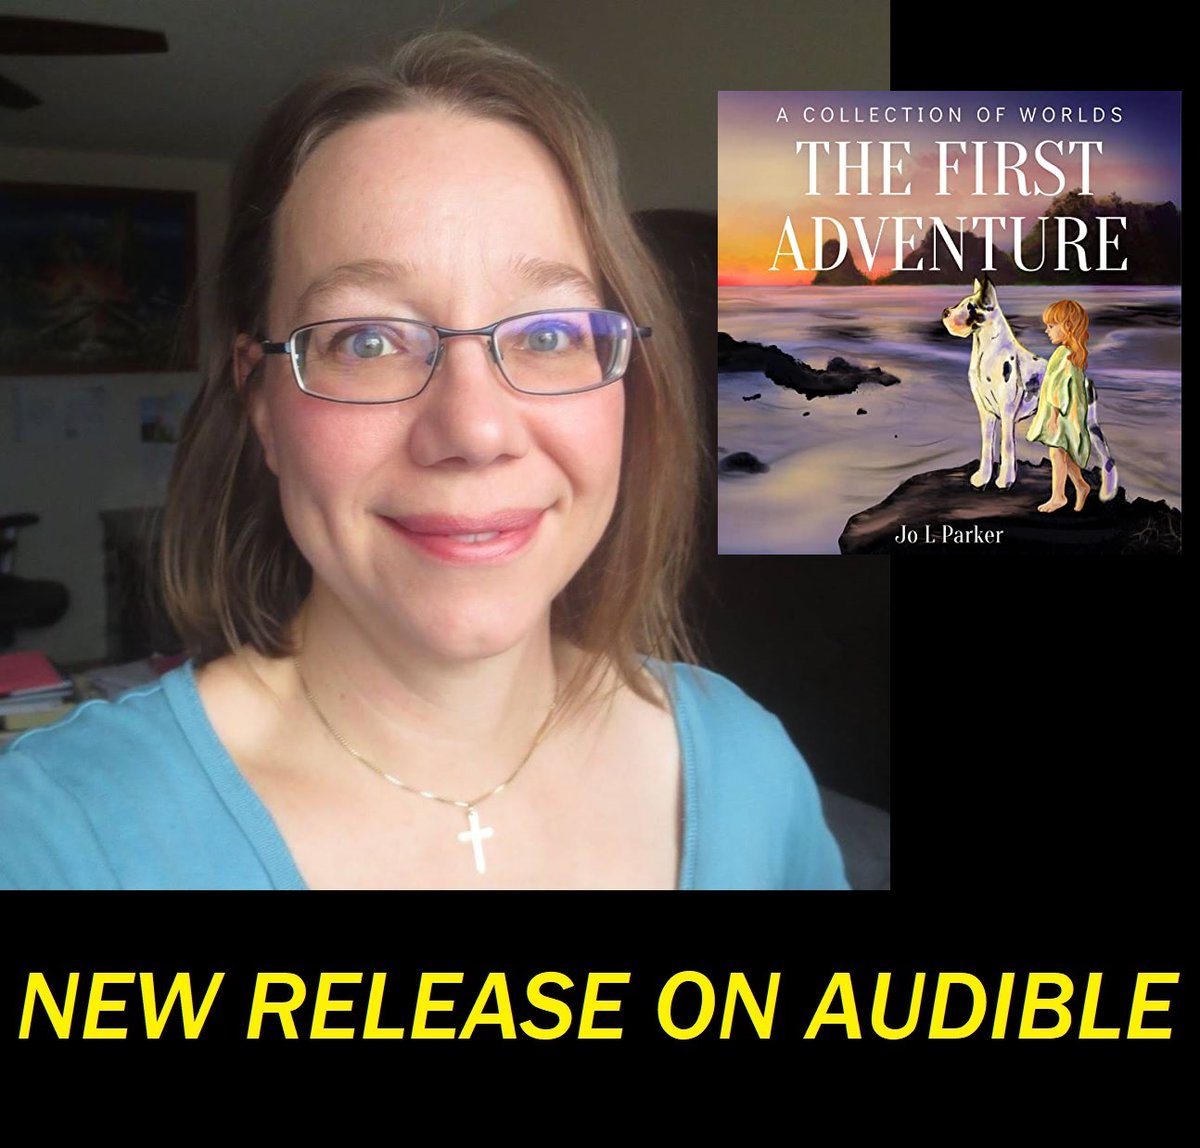 🐾🦉🦜 NEW RELEASE 🦜🦉🐾

It's here!!!  The First Adventure by Jo L Parker is an amazing children's story of adventure and magic!  

audible.com/pd/B09MDM6JRL?…

#NewReleaseAudiobook #childrensbooks #kidsbooks #childrensaudiobook #kidsaudiobook #kidslit #childrenslit #greatdanes